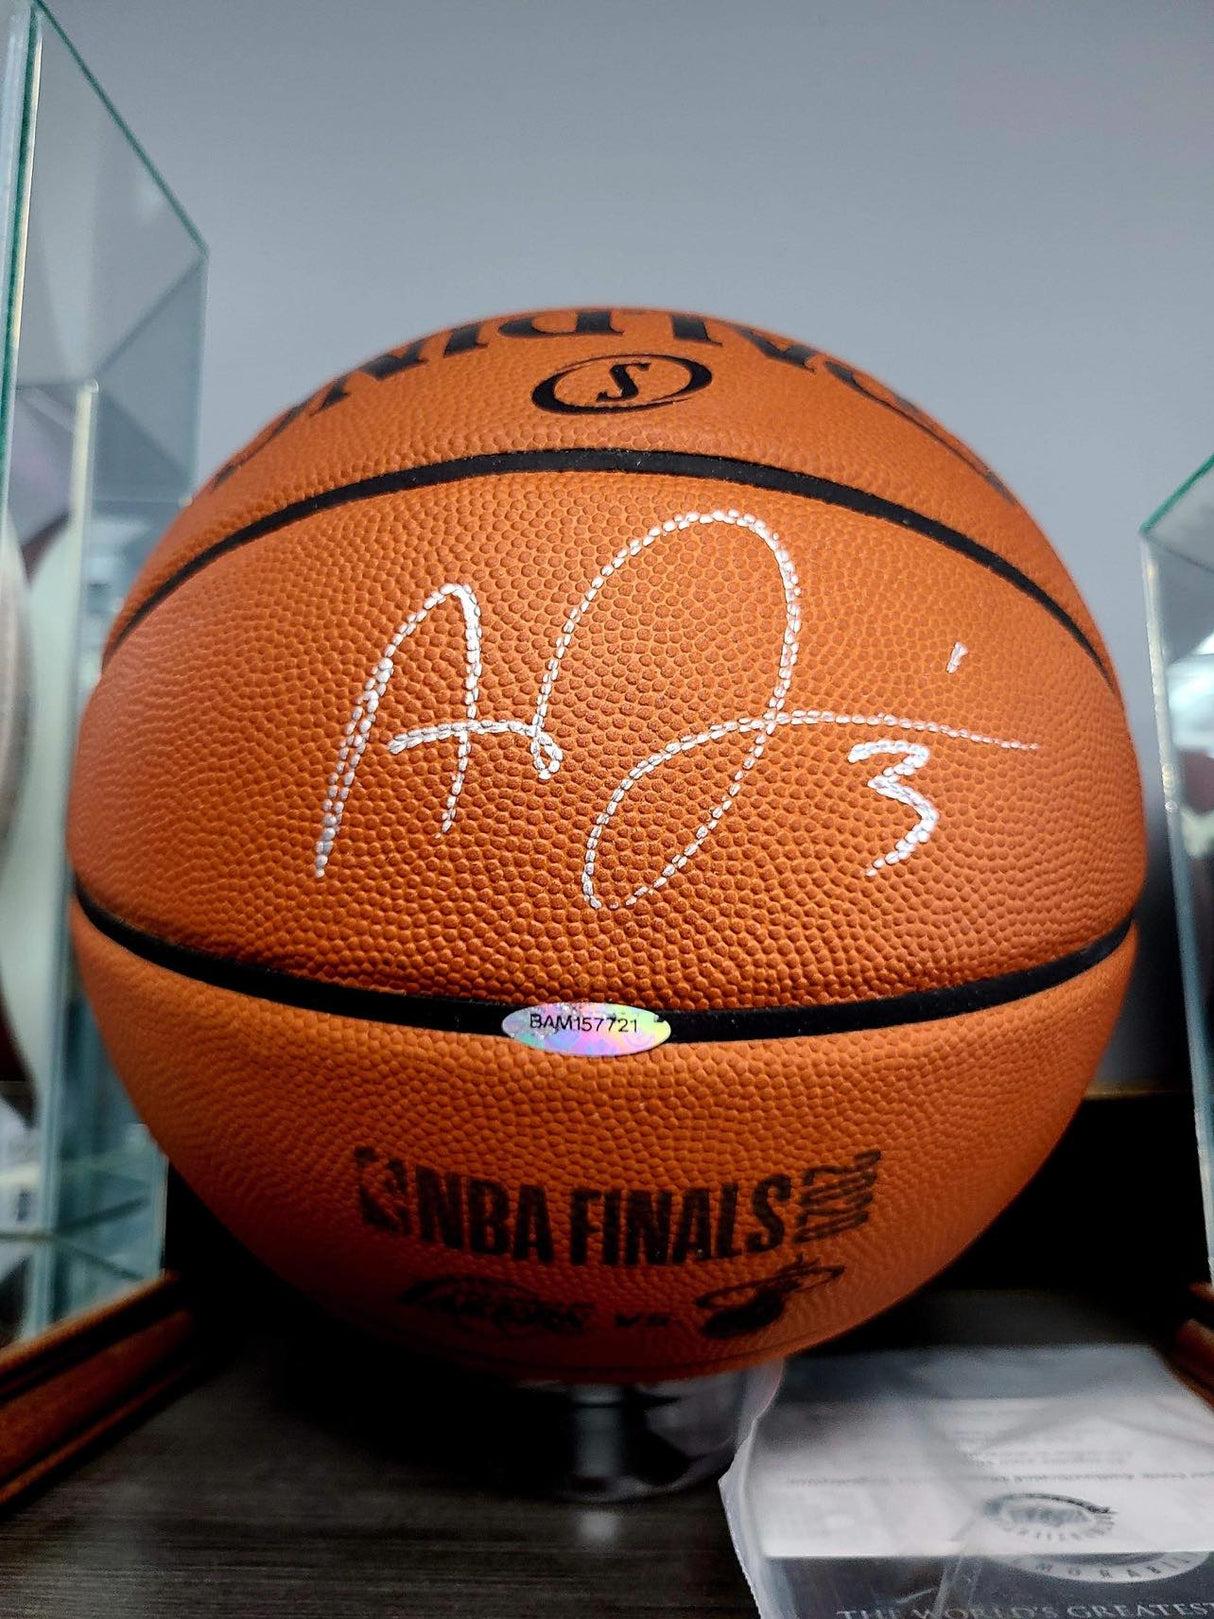 Anthony Davis Signed Basketball with COA NBA FINALS BALL